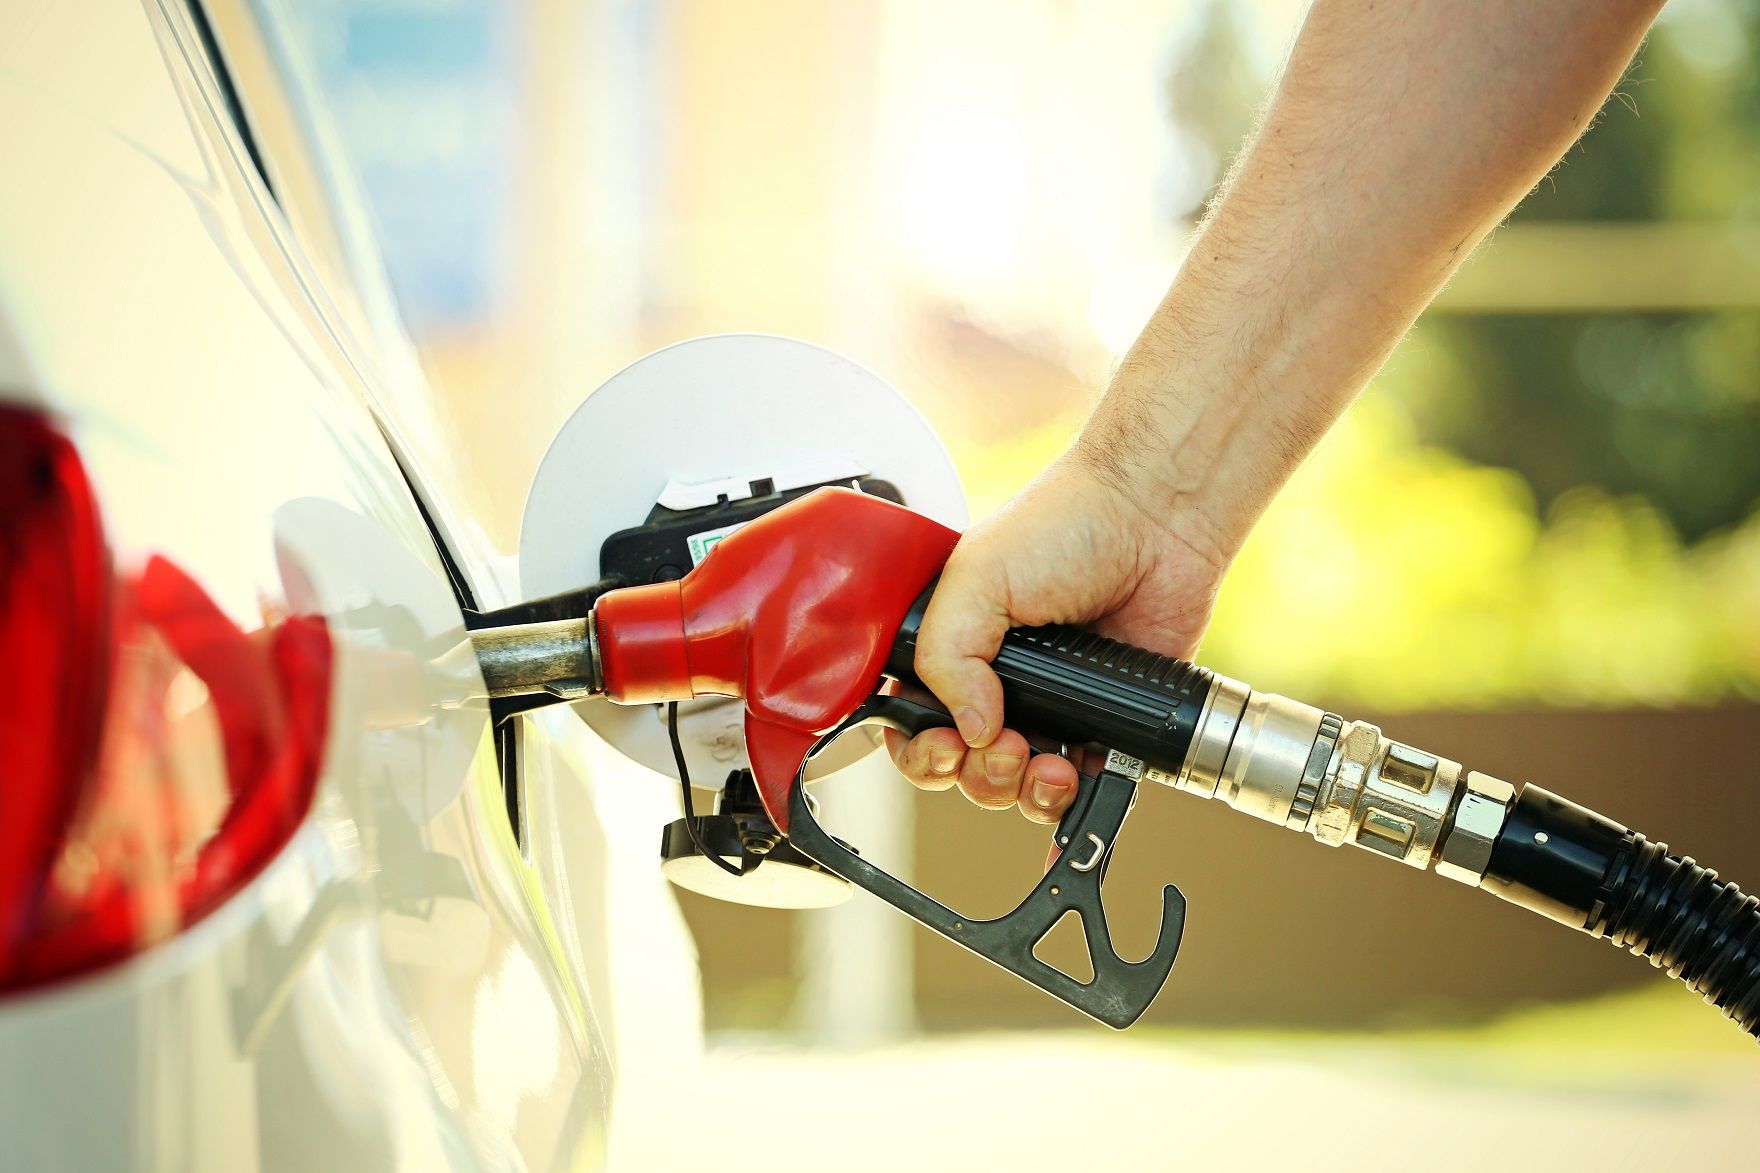 Some Tips to Save Fuel this Summer